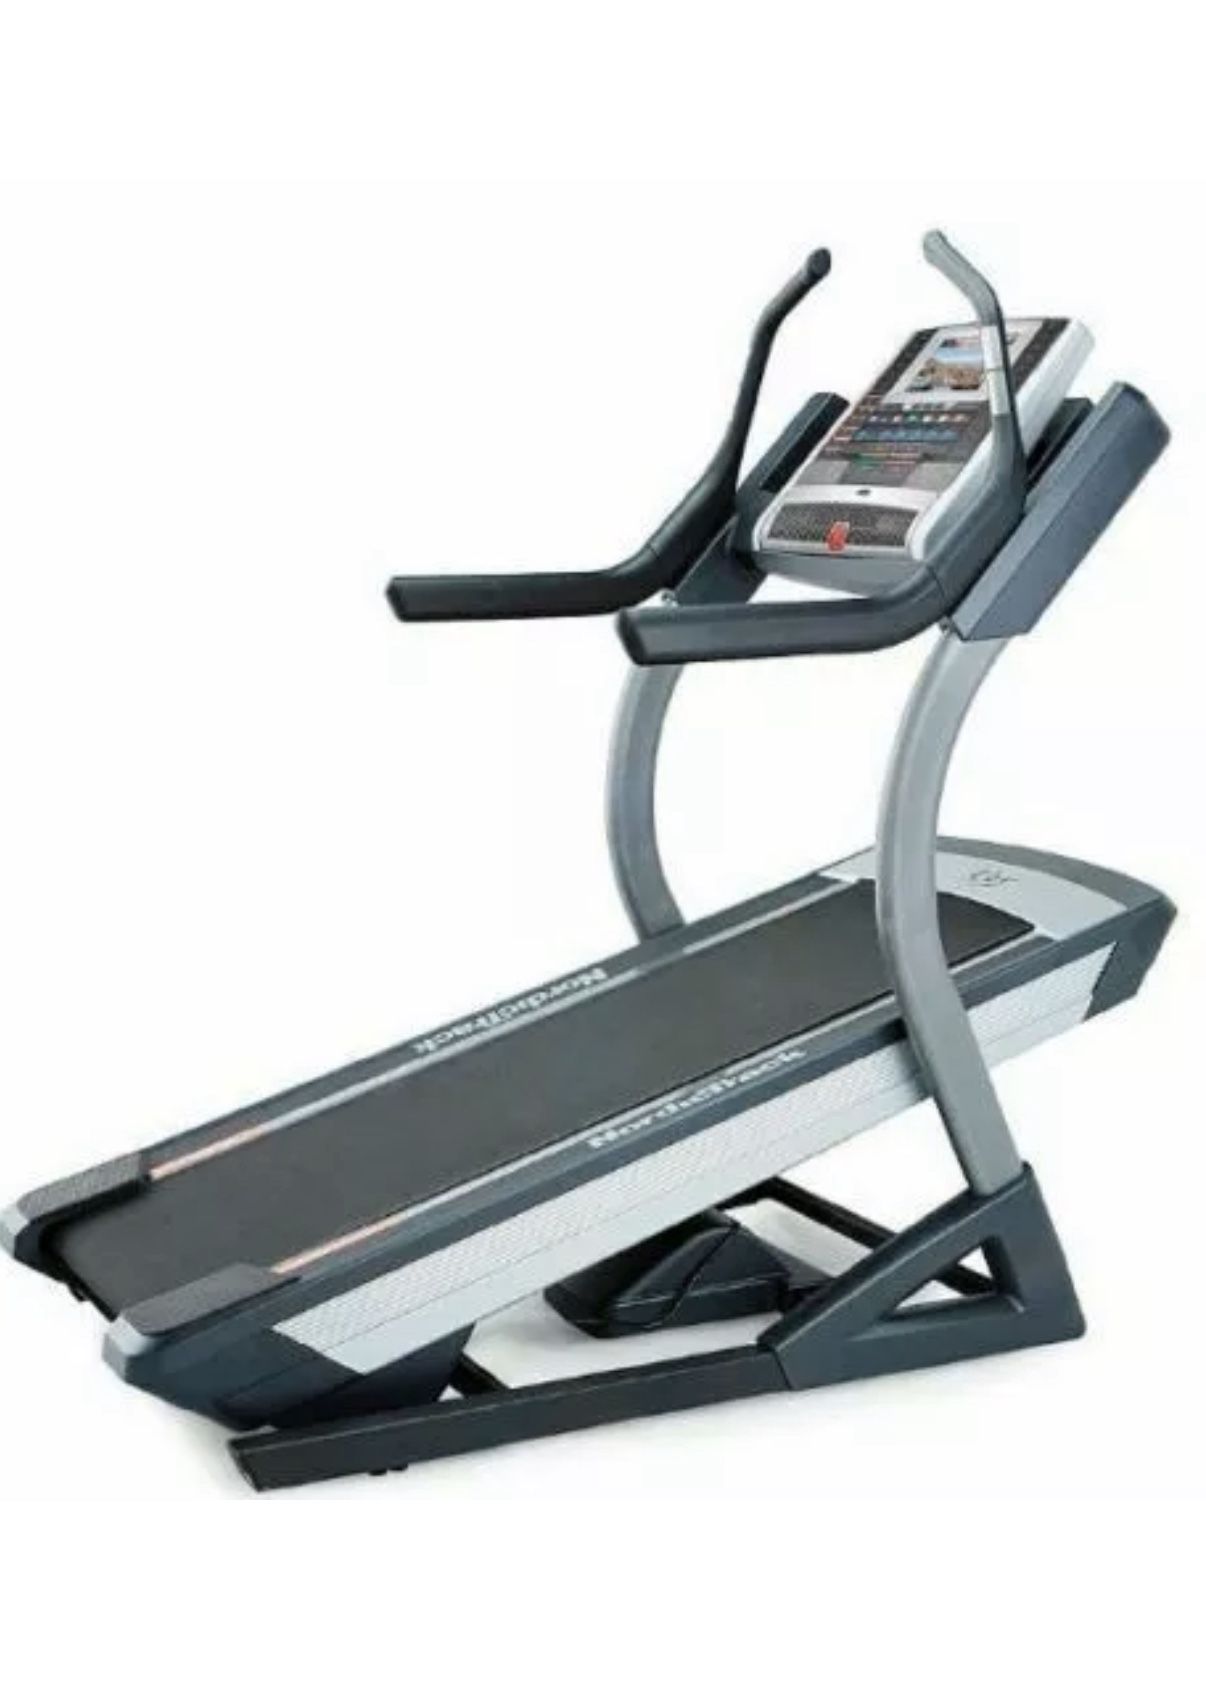 Nordictrack treadmill great condition hardly used